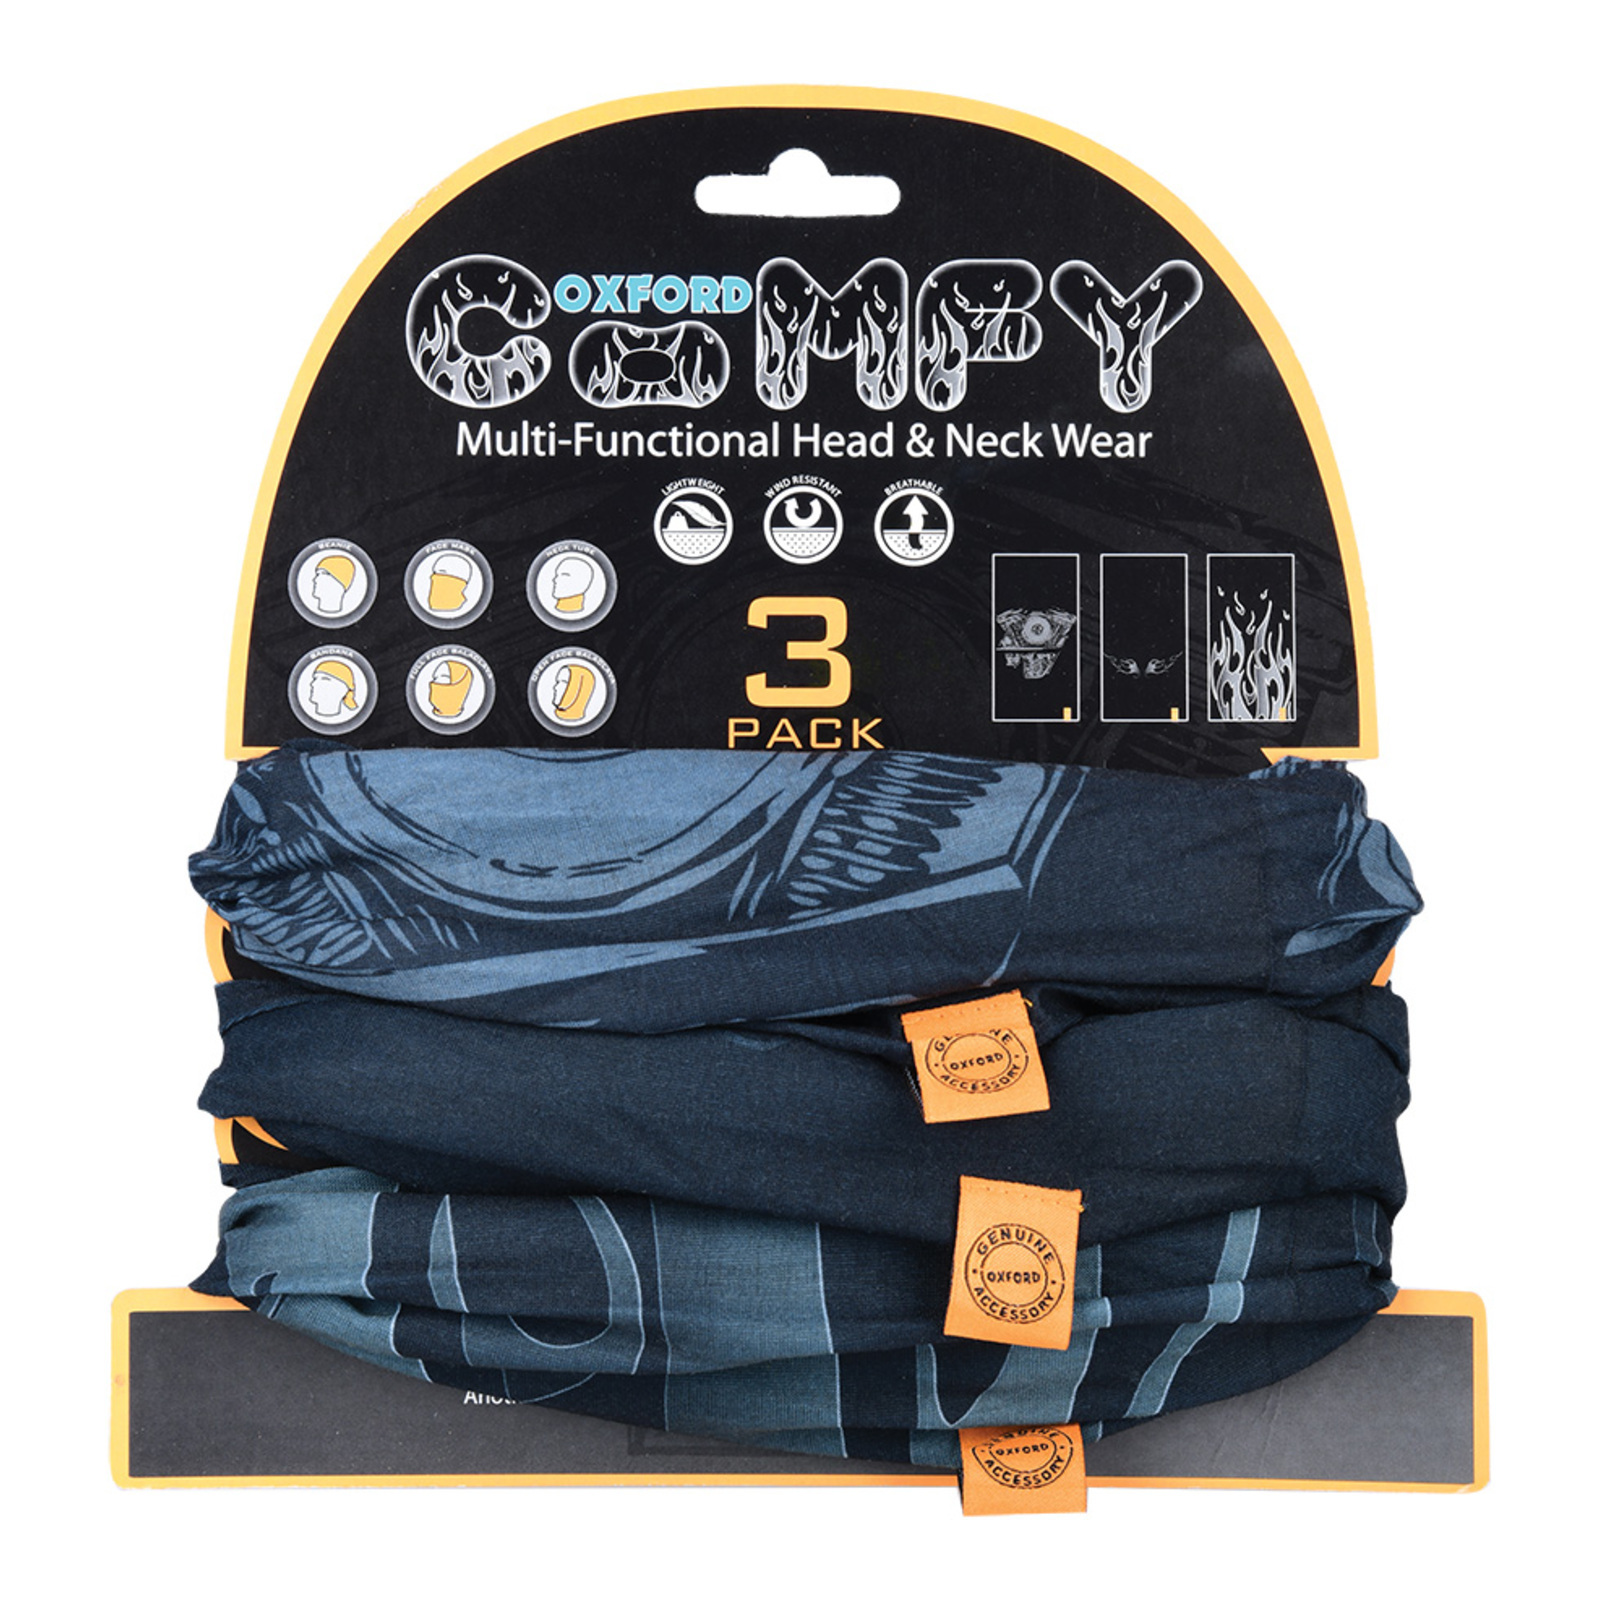 Oxford Comfy HD Graphics (3 Pack)